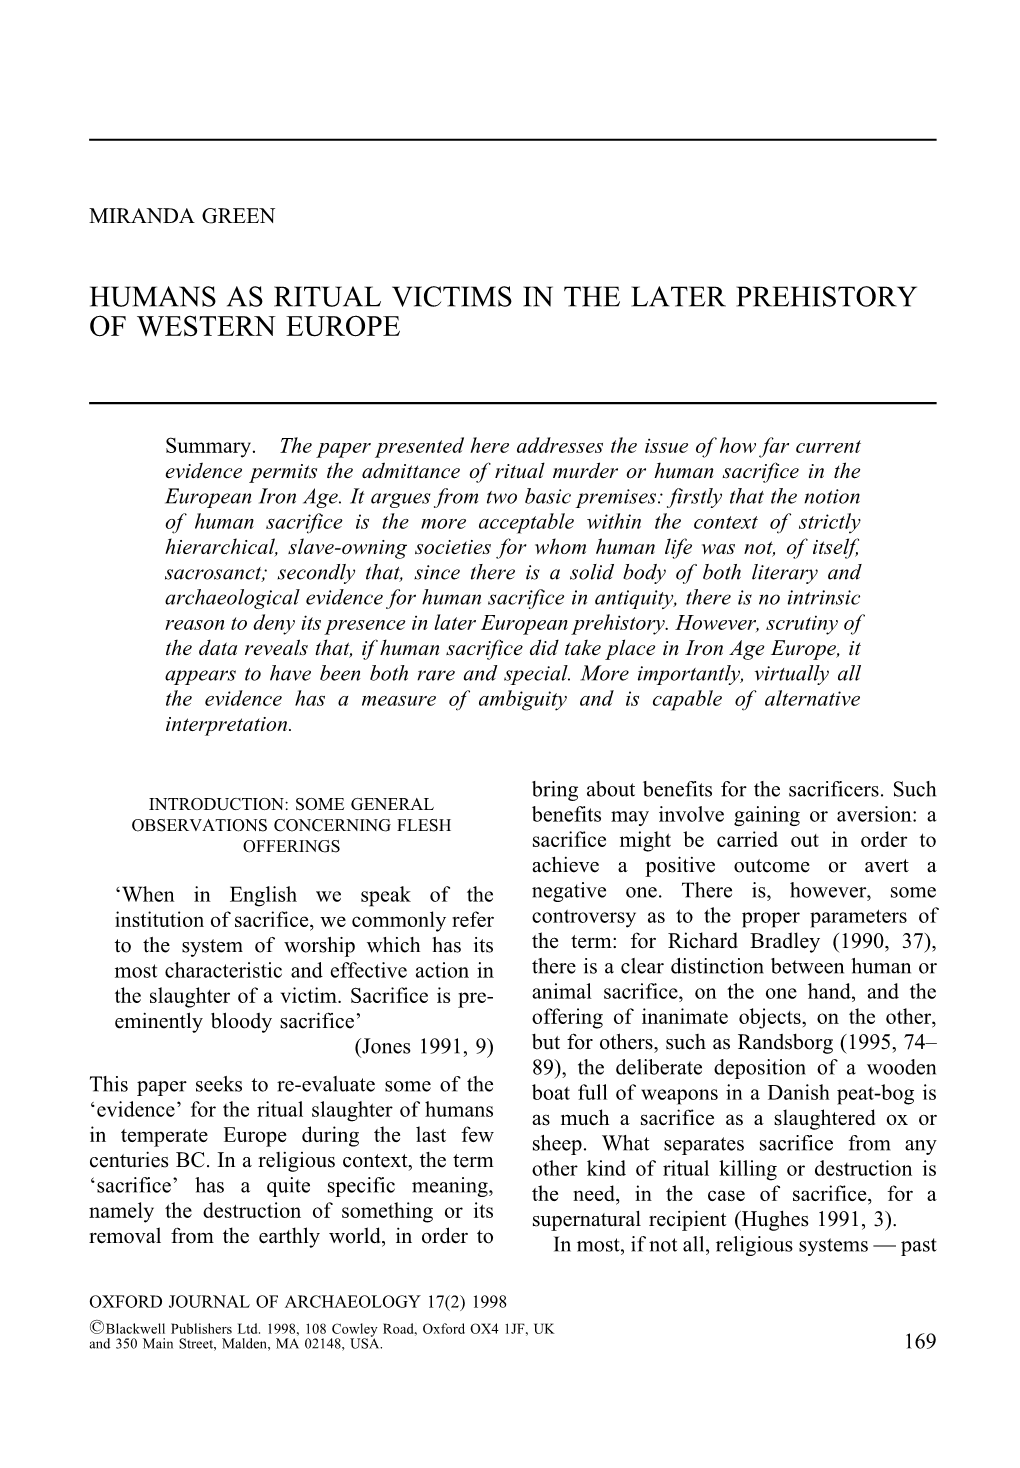 Humans As Ritual Victims in the Later Prehistory of Western Europe